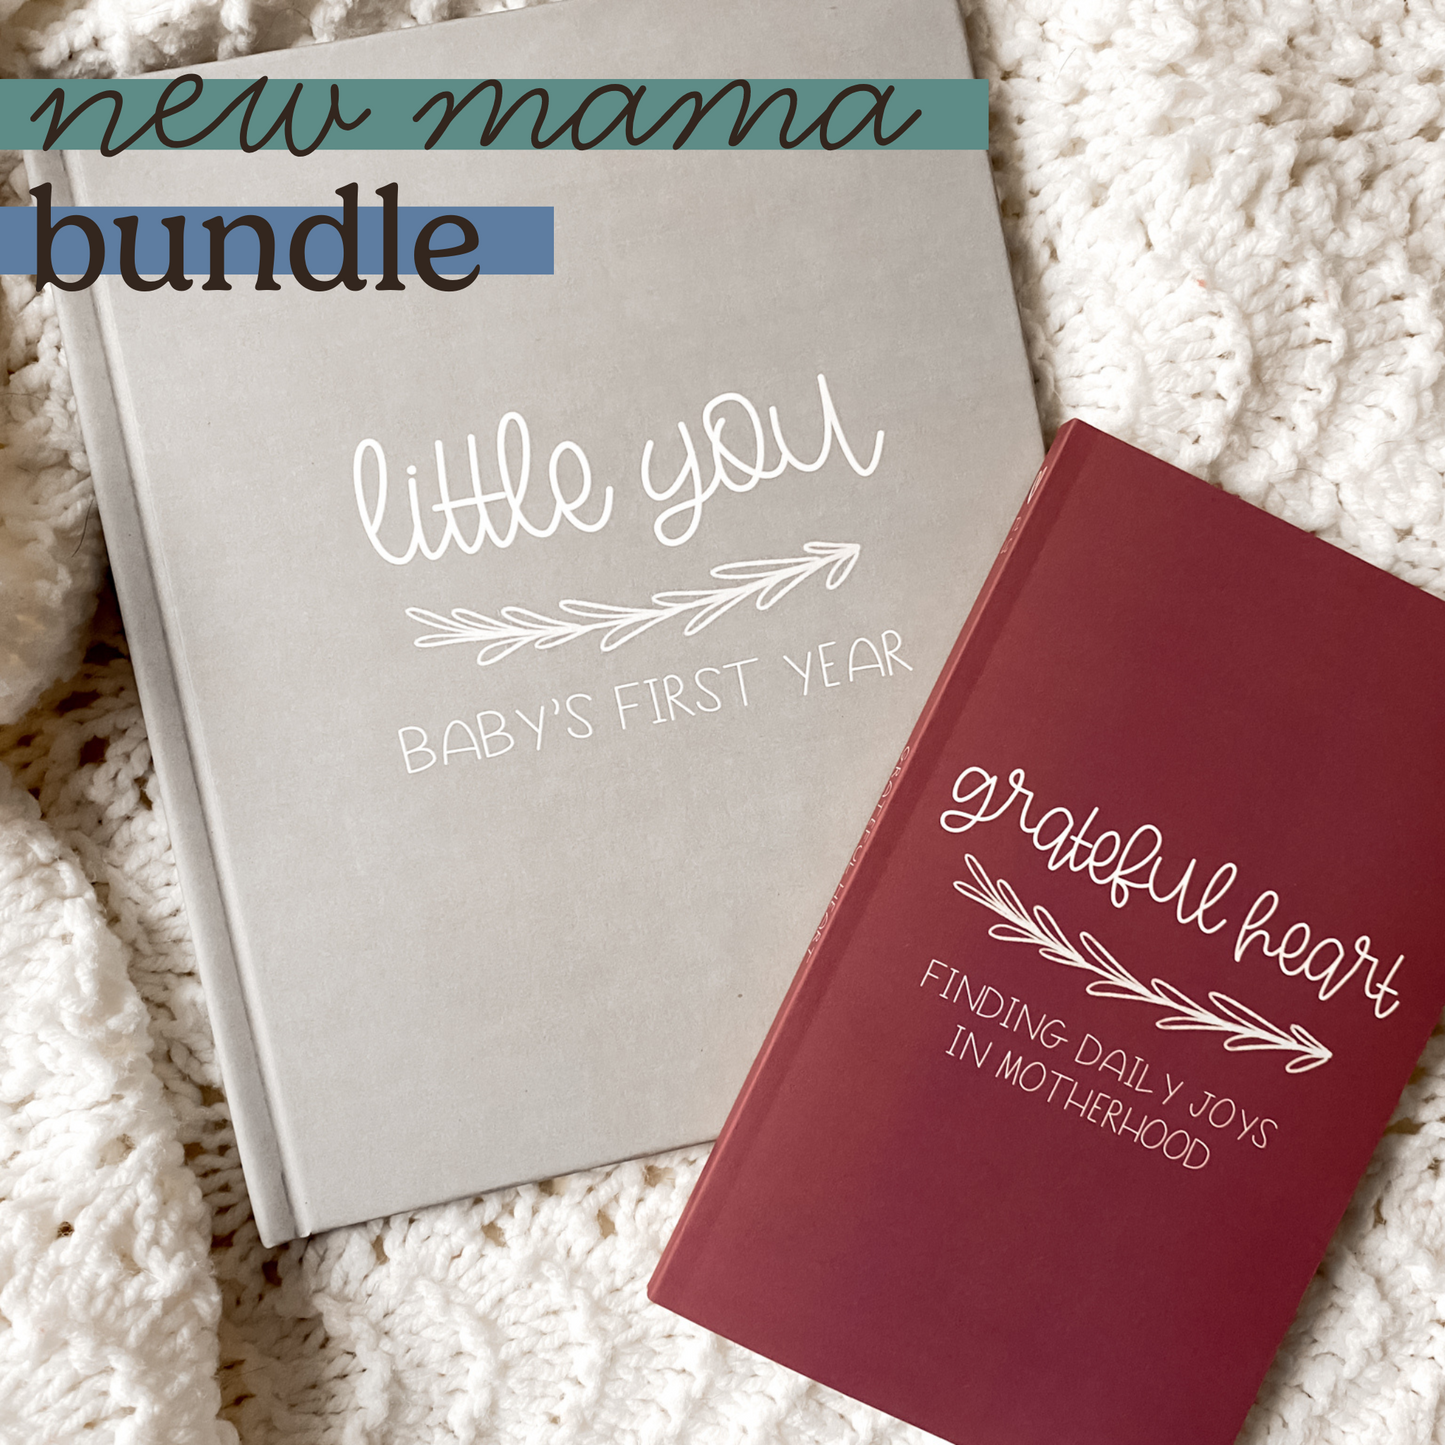 New Mama Bundle includes Little You Baby's First Year and Grateful Heart Finding Daily Joys in Motherhood